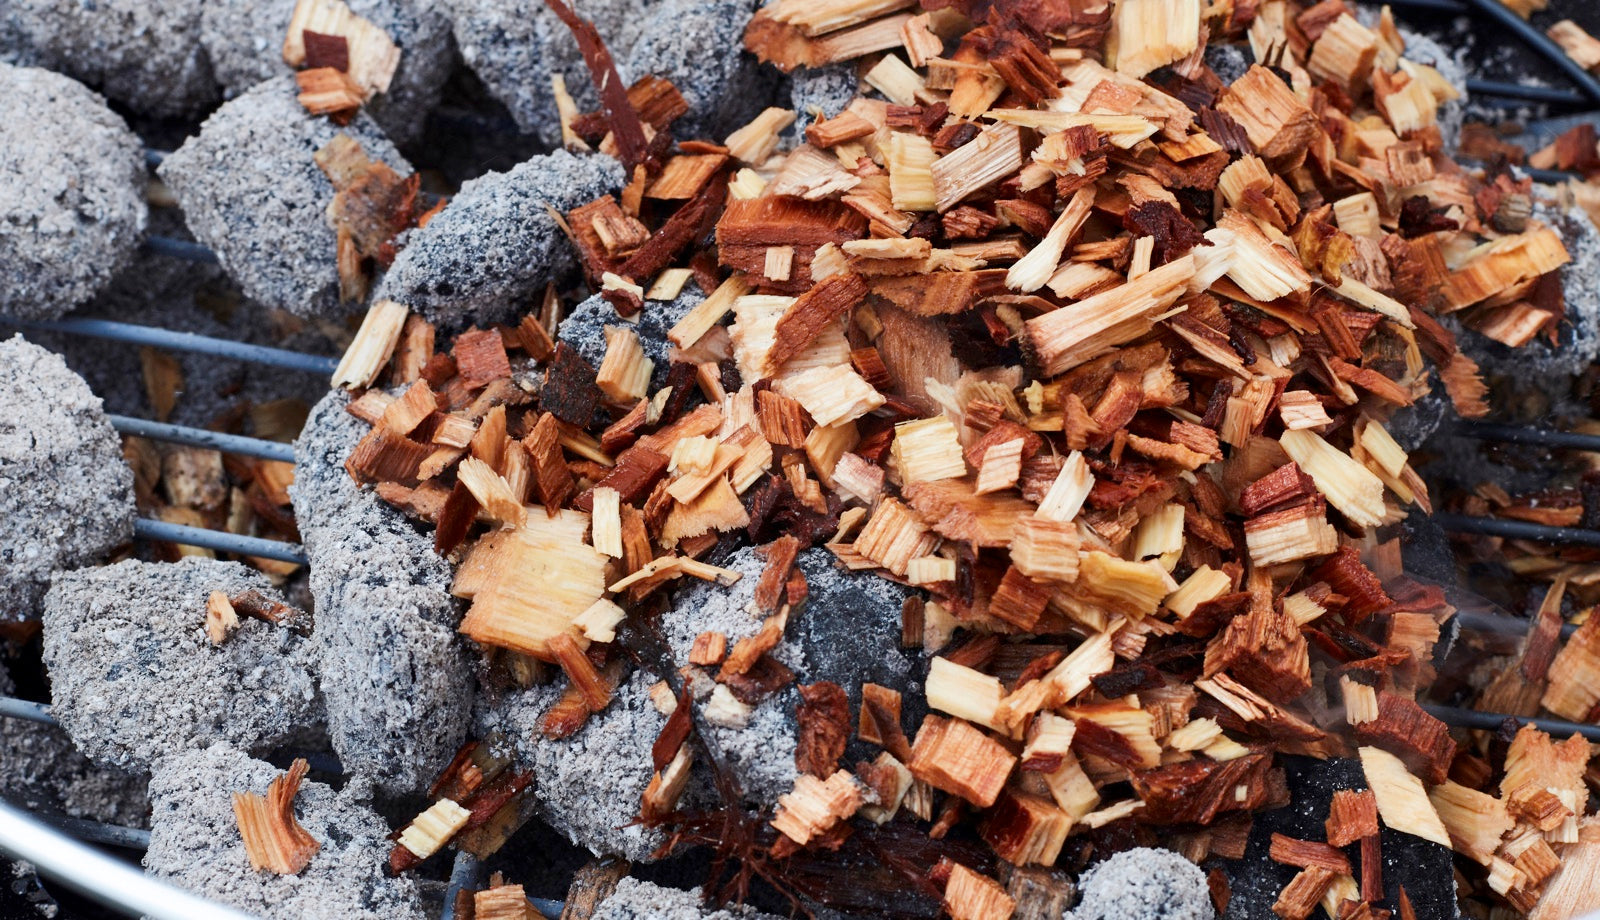 Which wood chunks, smoking chips and smoking dust do you use for